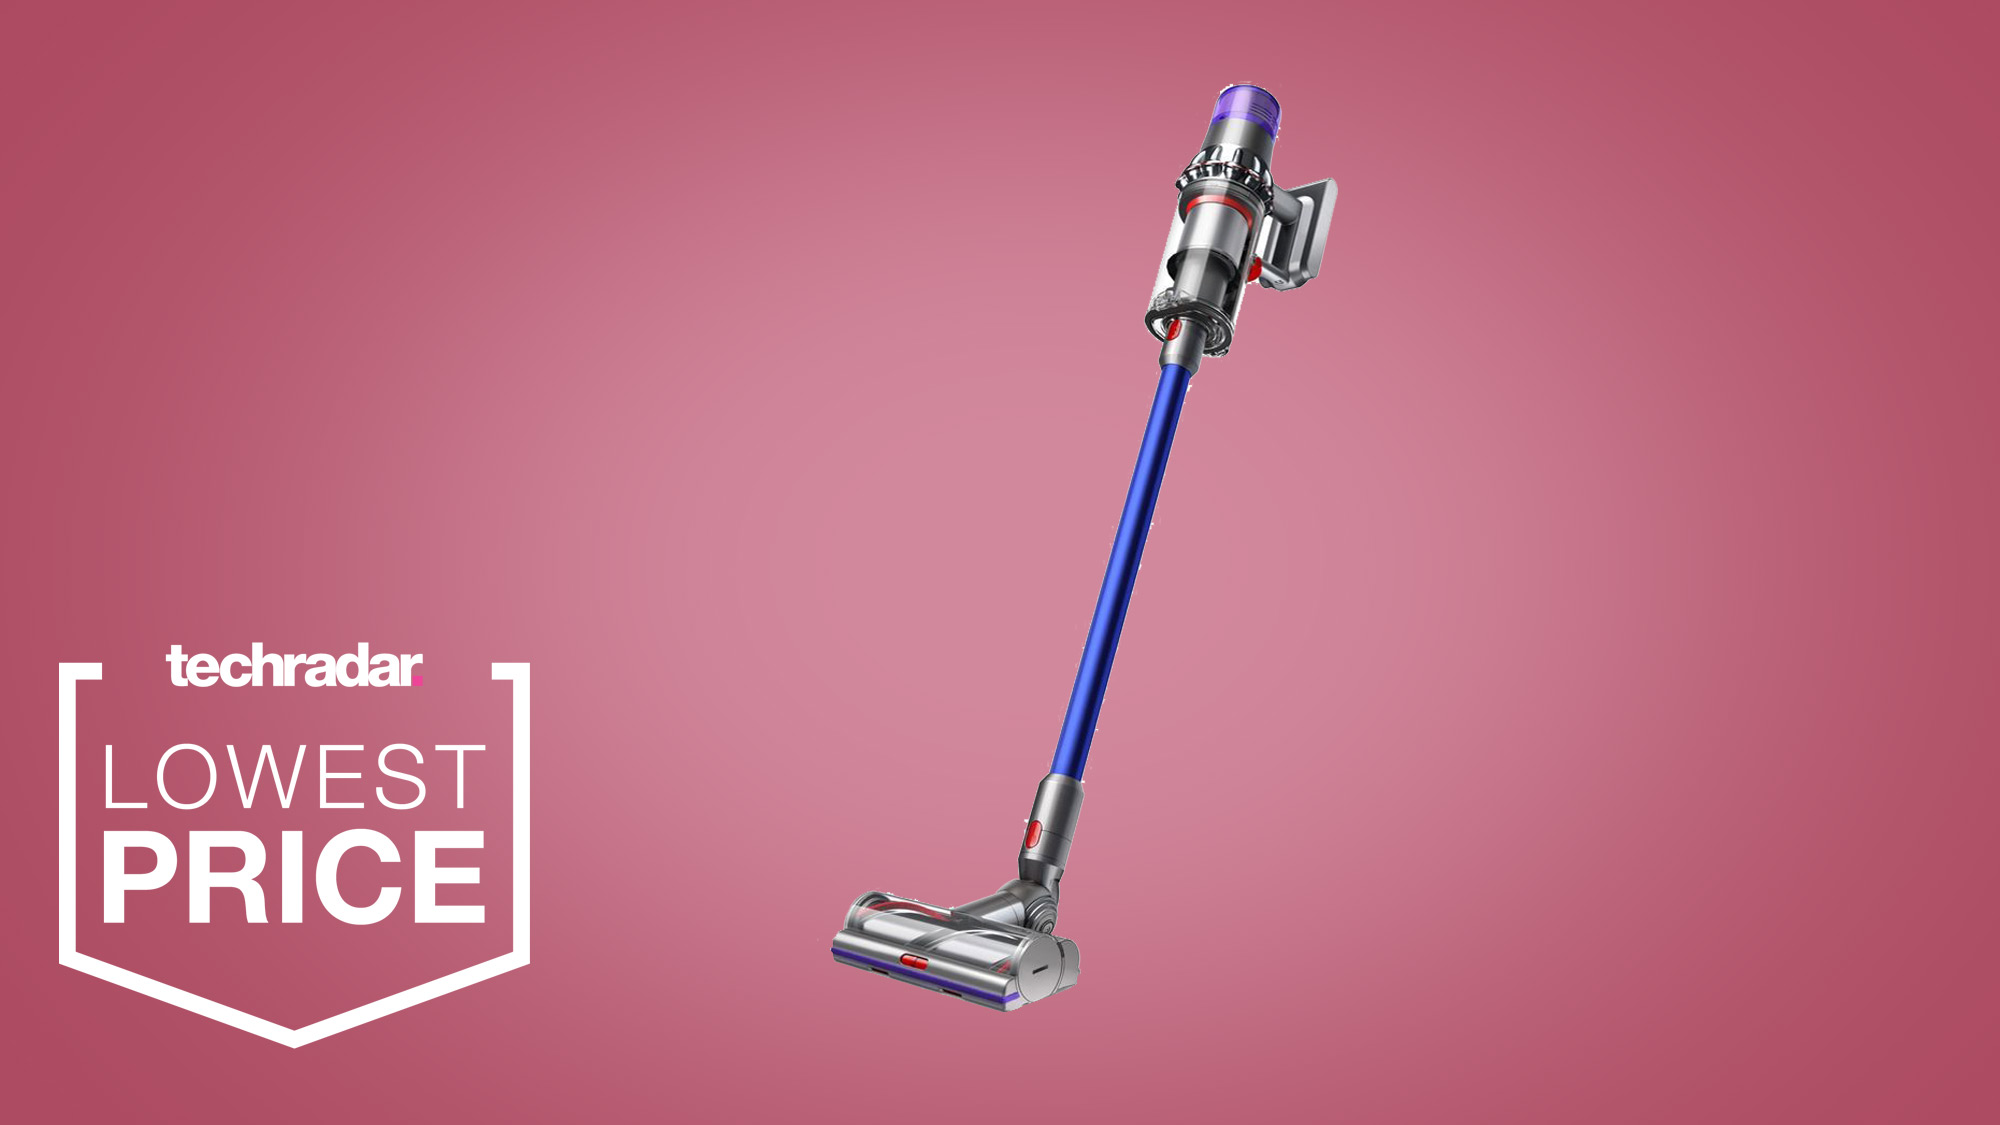 Snap up a Dyson V11 vacuum at its lowest price ever | TechRadar